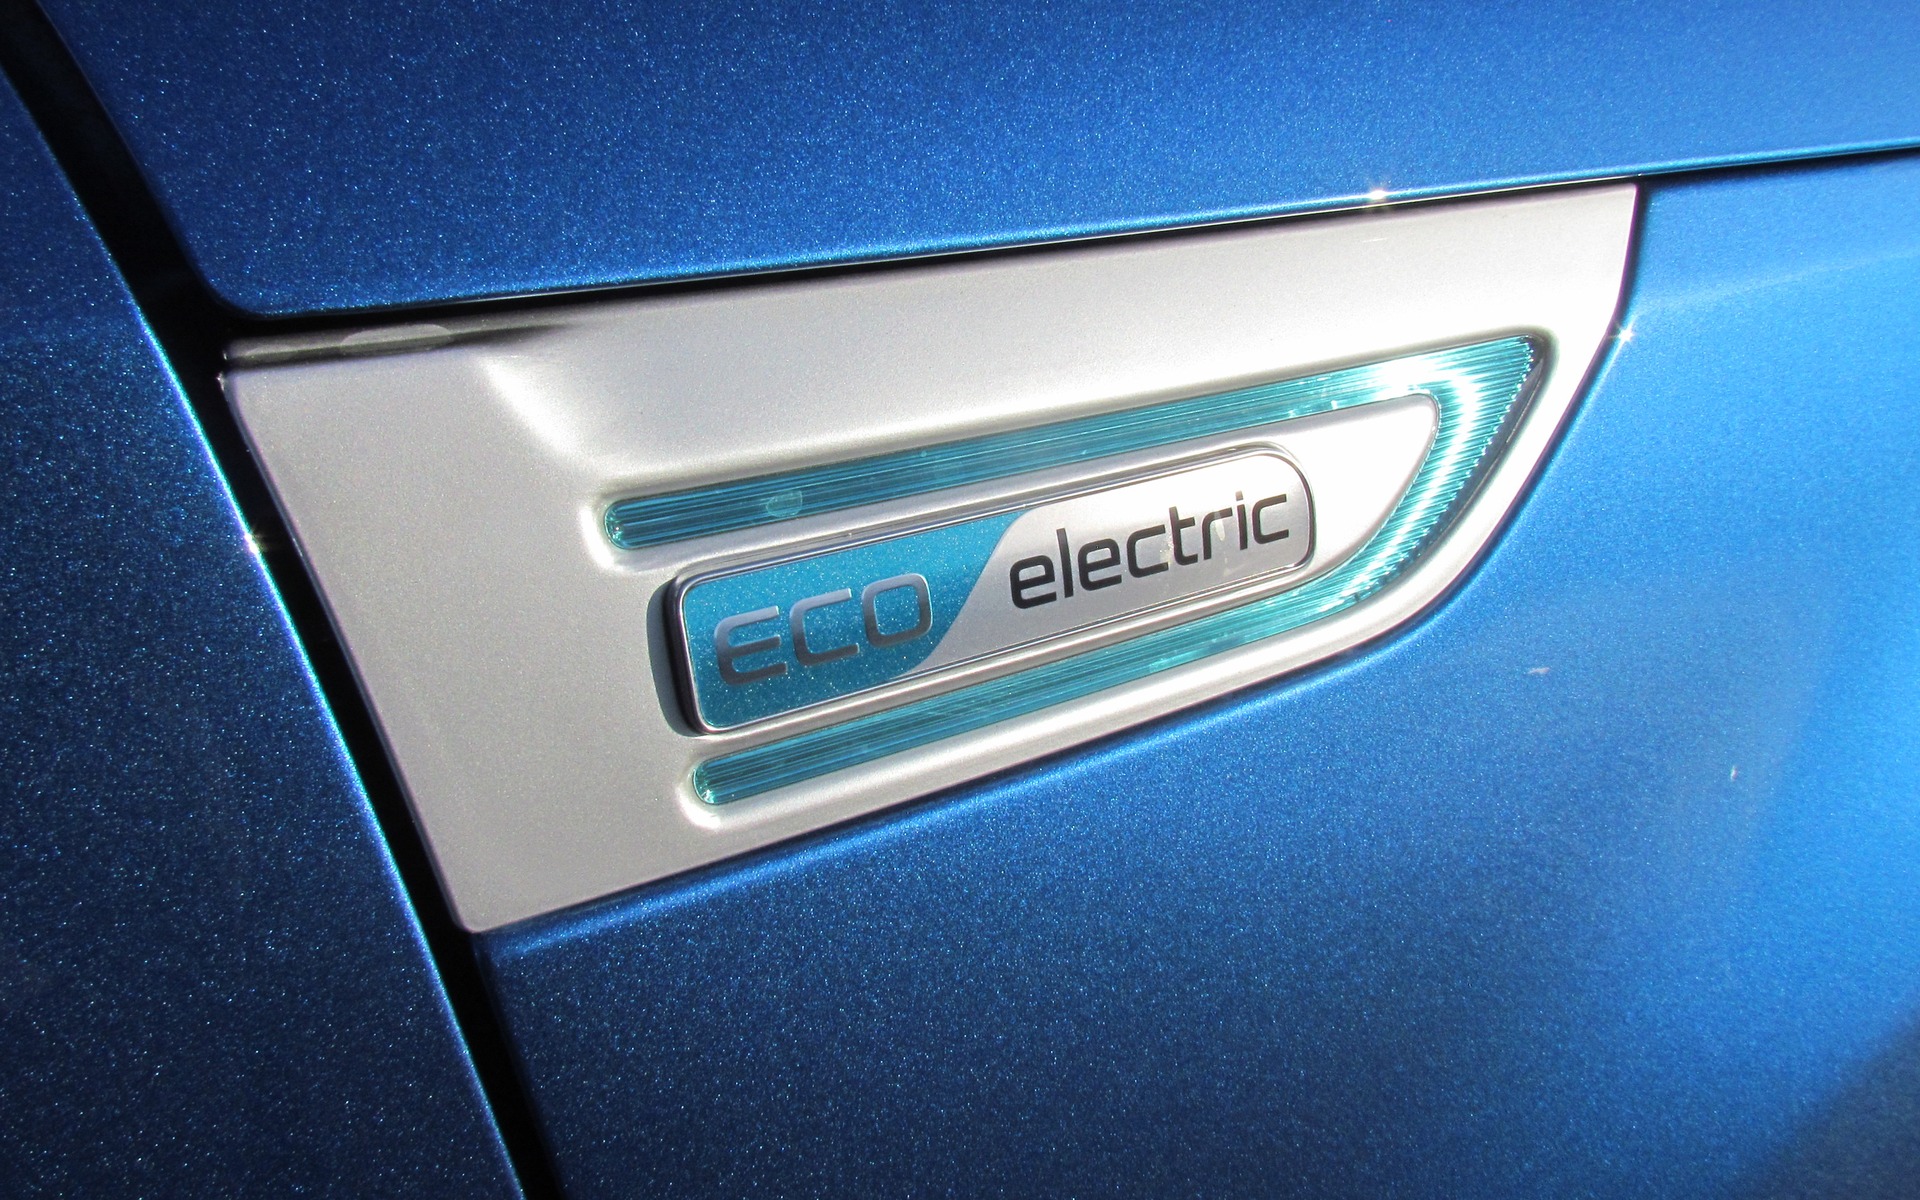 Unique badging distinguishes the EV from the regular Soul.